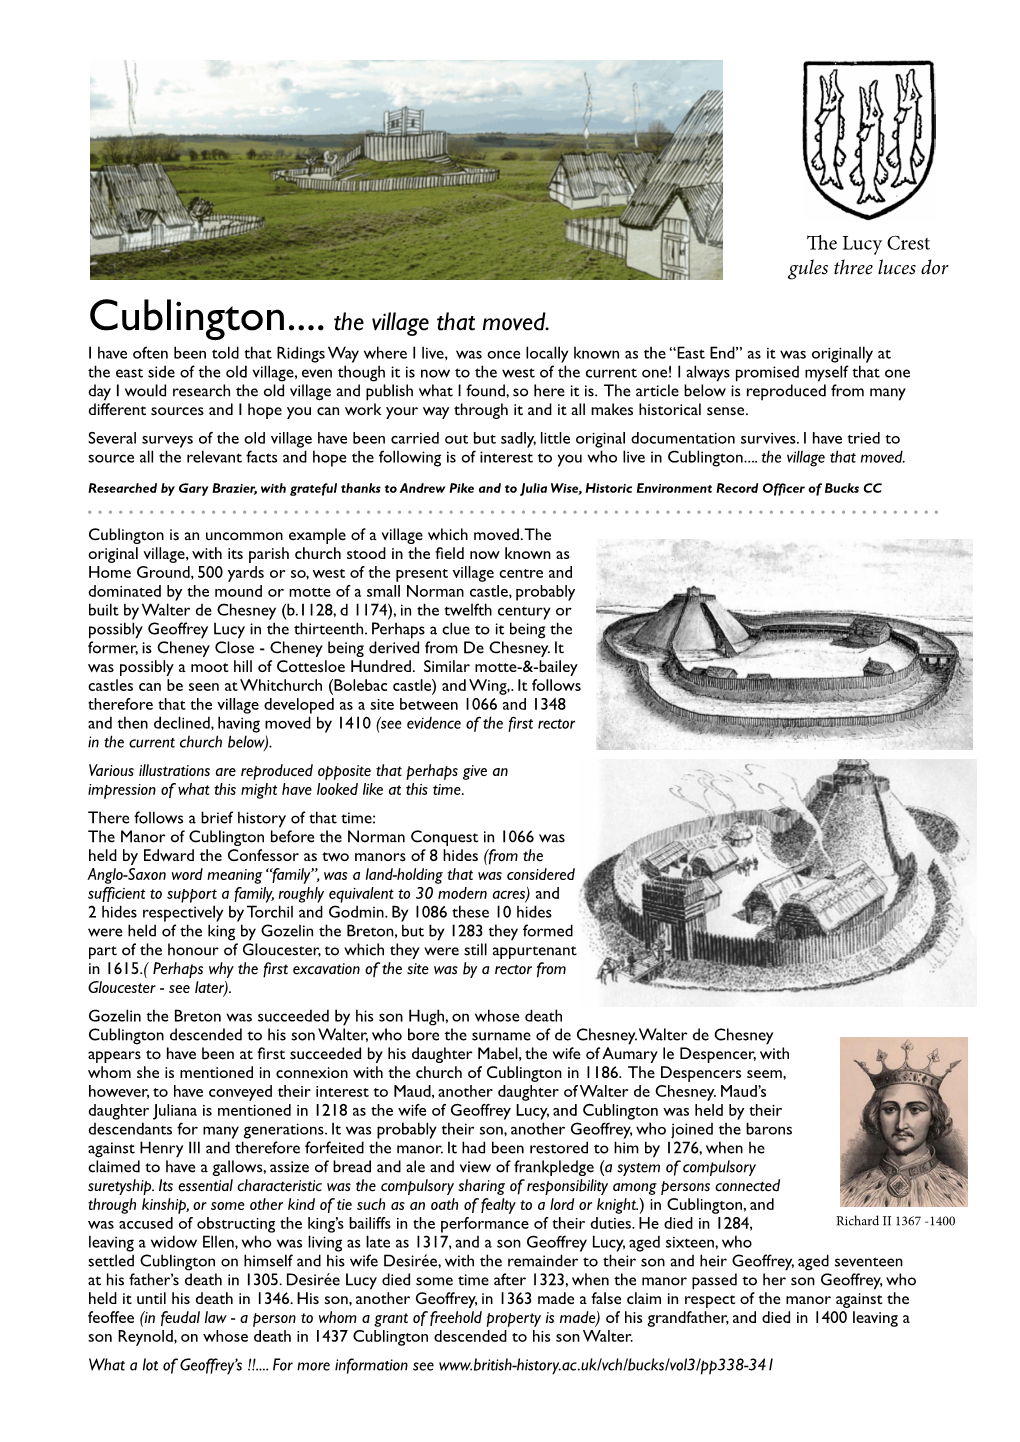 Cublington...The Village That Moved